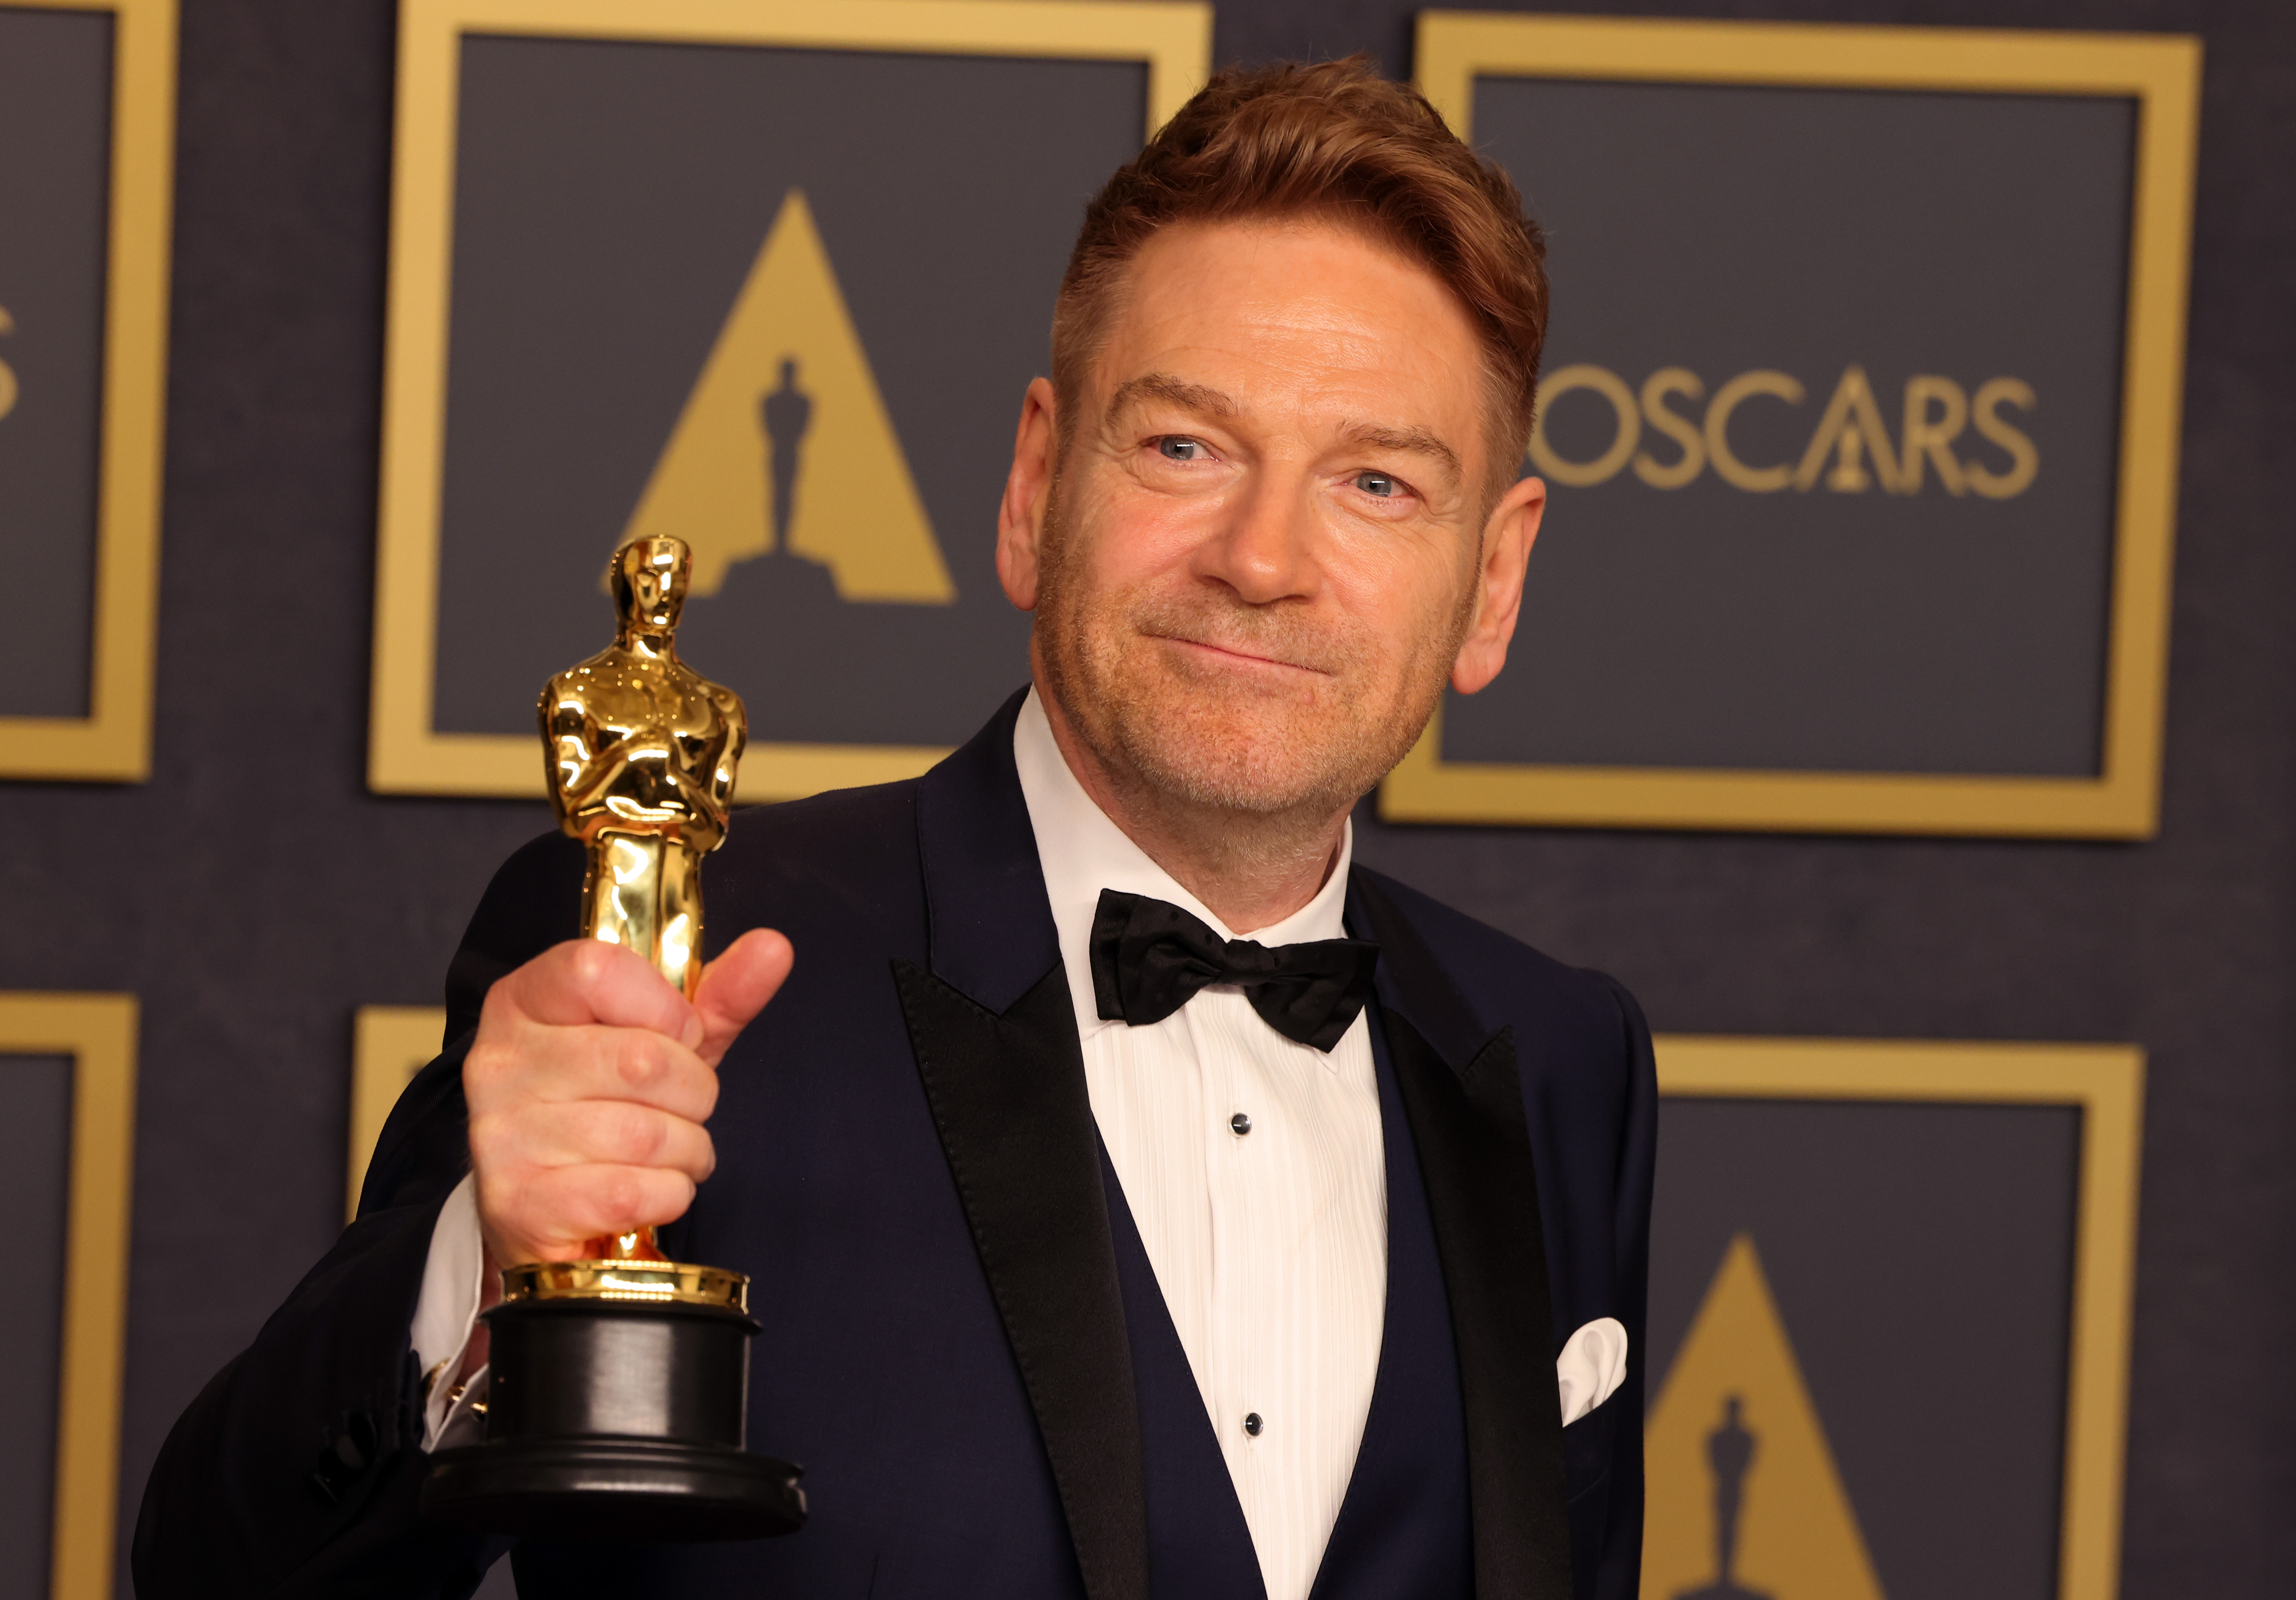 Kenneth Branagh on March 27, 2022, in Hollywood, California | Source: Getty Images